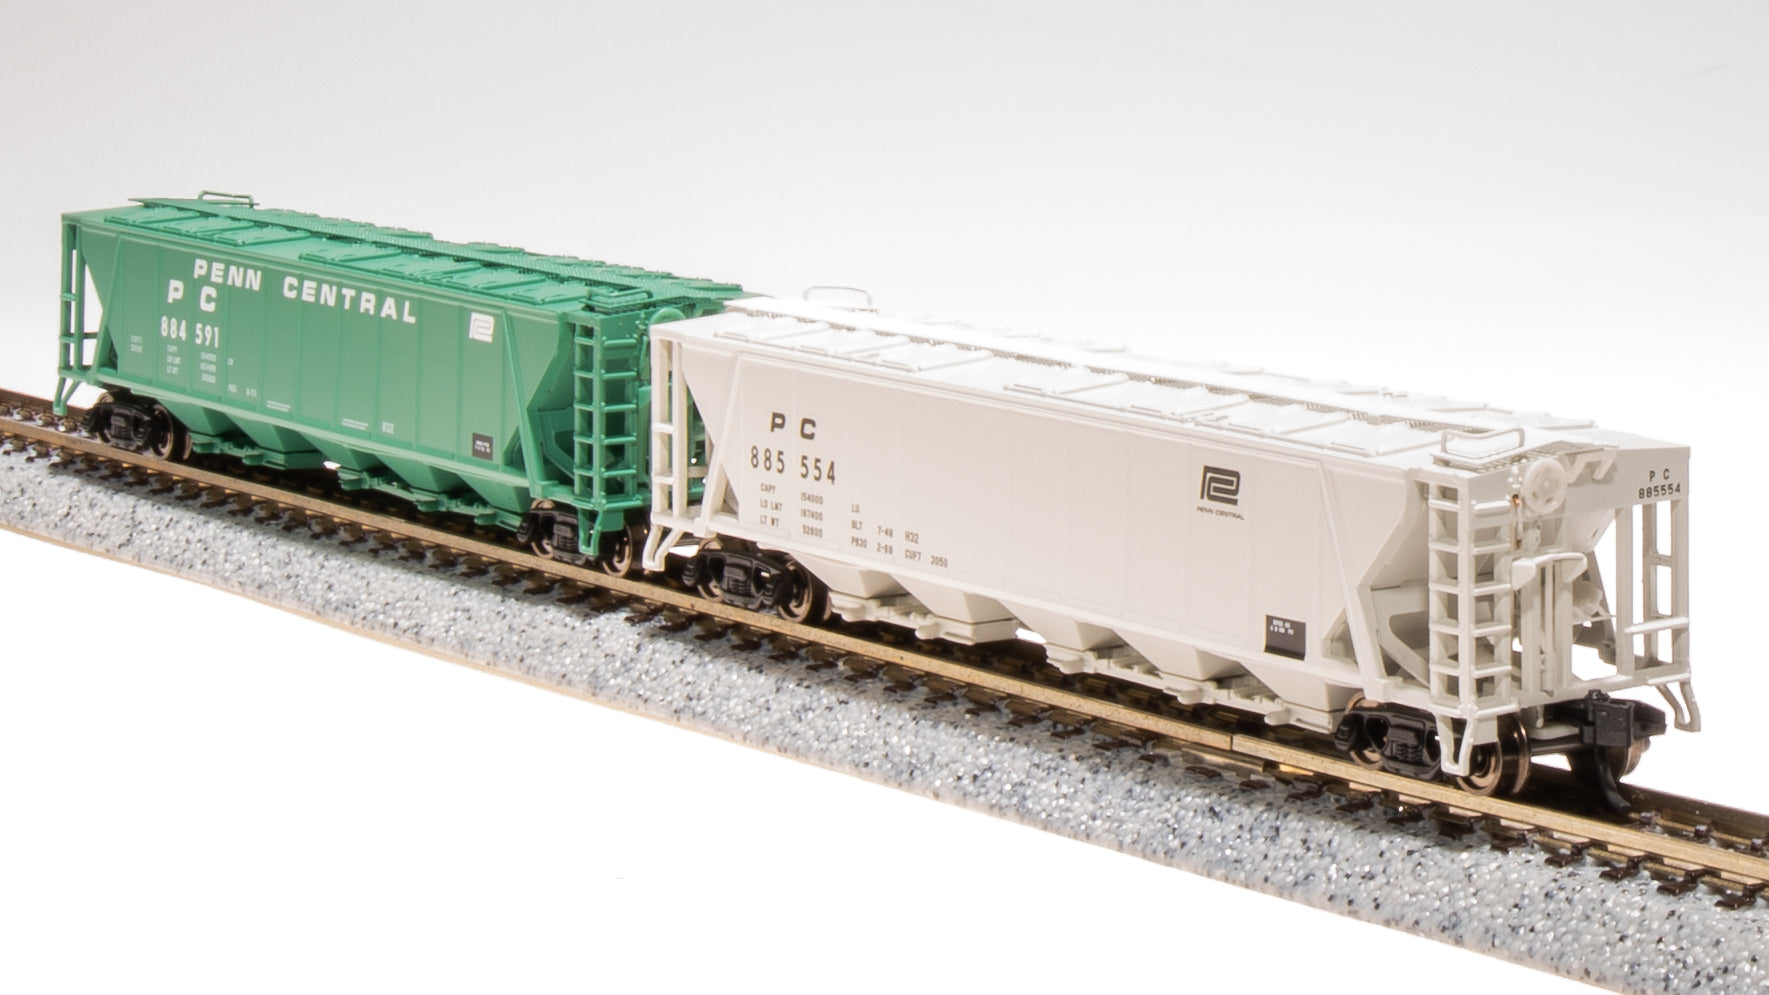 7257 H32 Covered Hopper, Penn Central, Variety 2-pack, N Scale Default Title